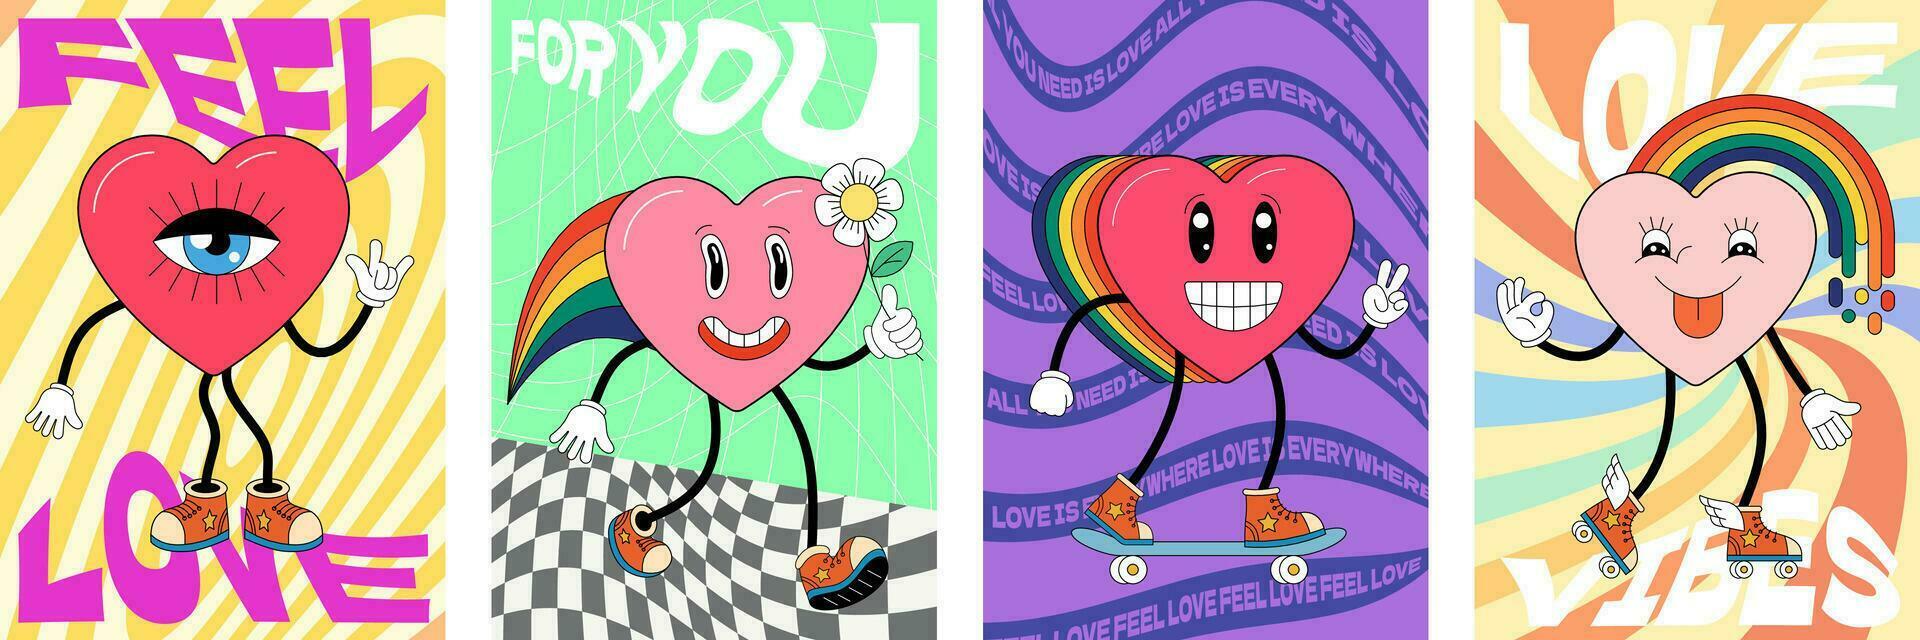 Happy Valentines Day greeting card. Groovy art typography poster. Retro funky cartoon heart characters. Valentine holiday vintage hippy hearts mascots. Crazy hippie love placard. Trendy y2k eps banner vector